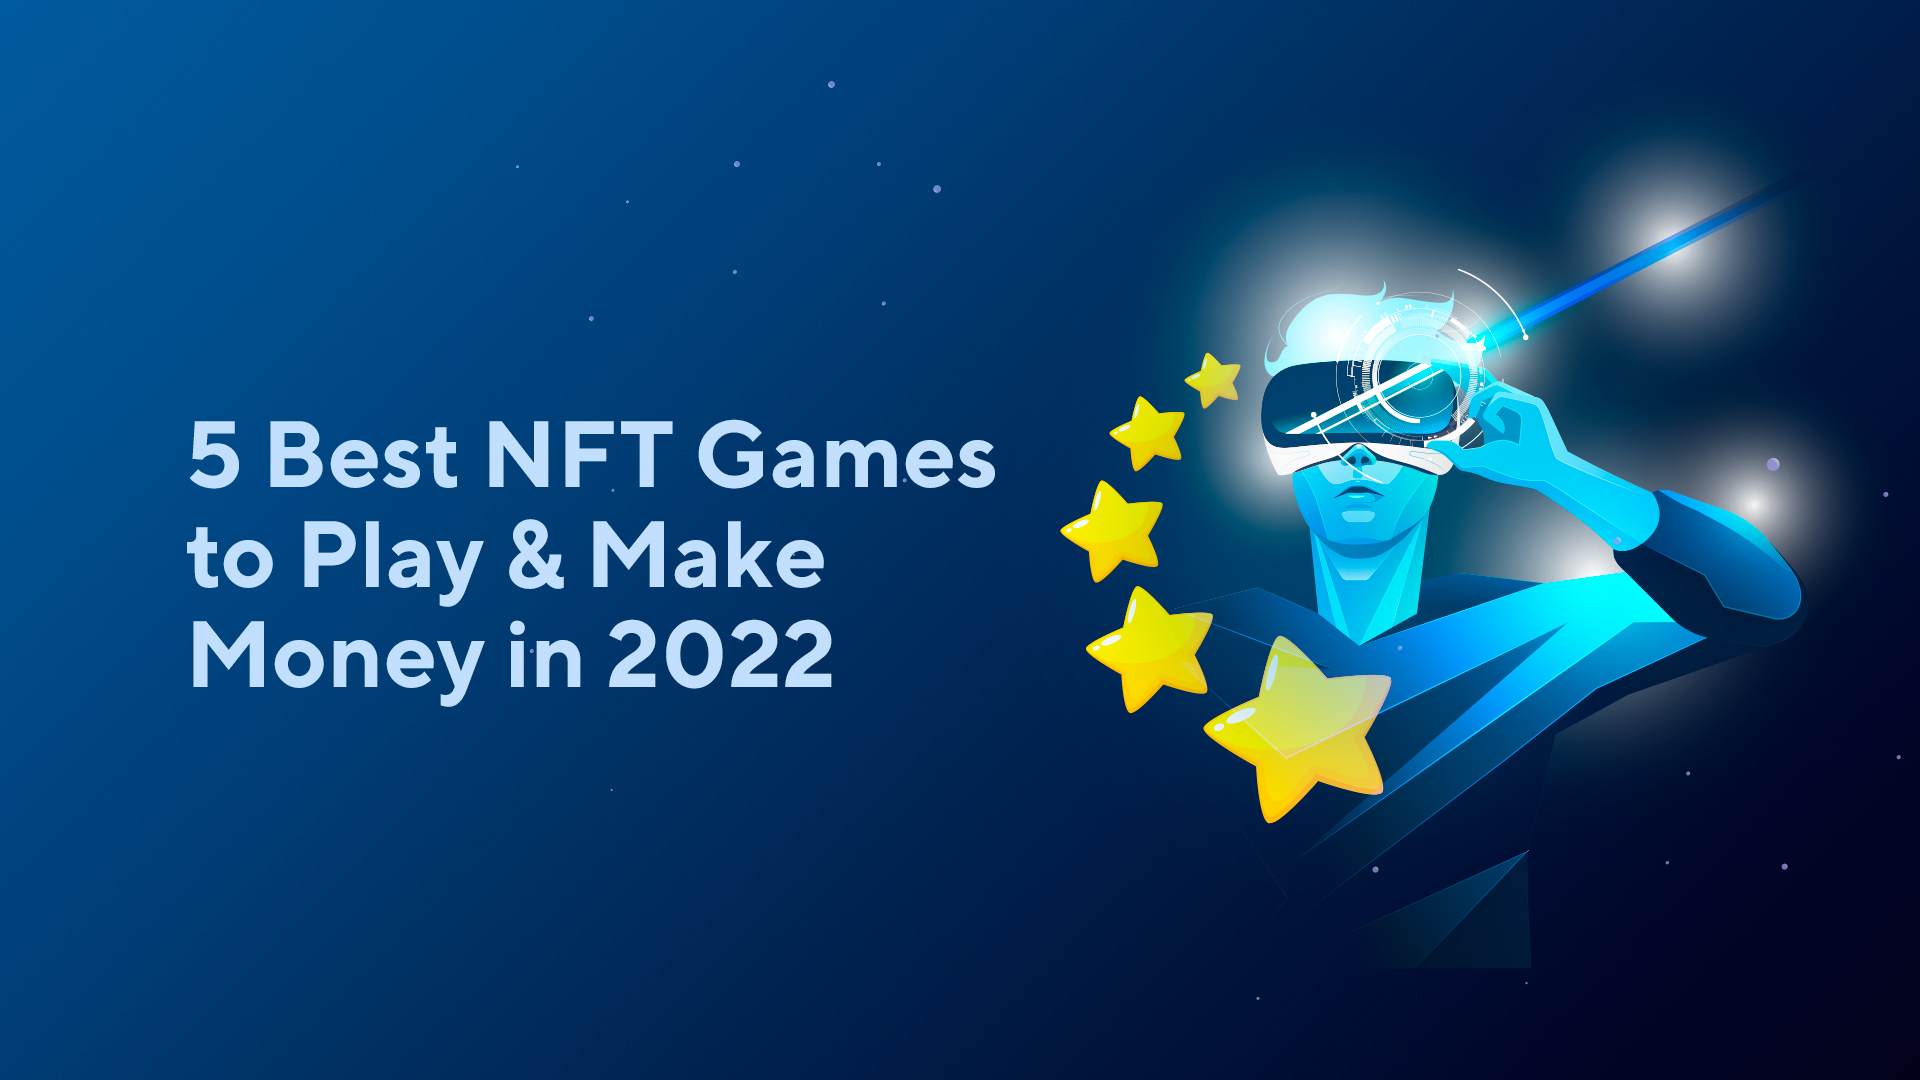 5 Best NFT Games to Play & Make Money in 2022